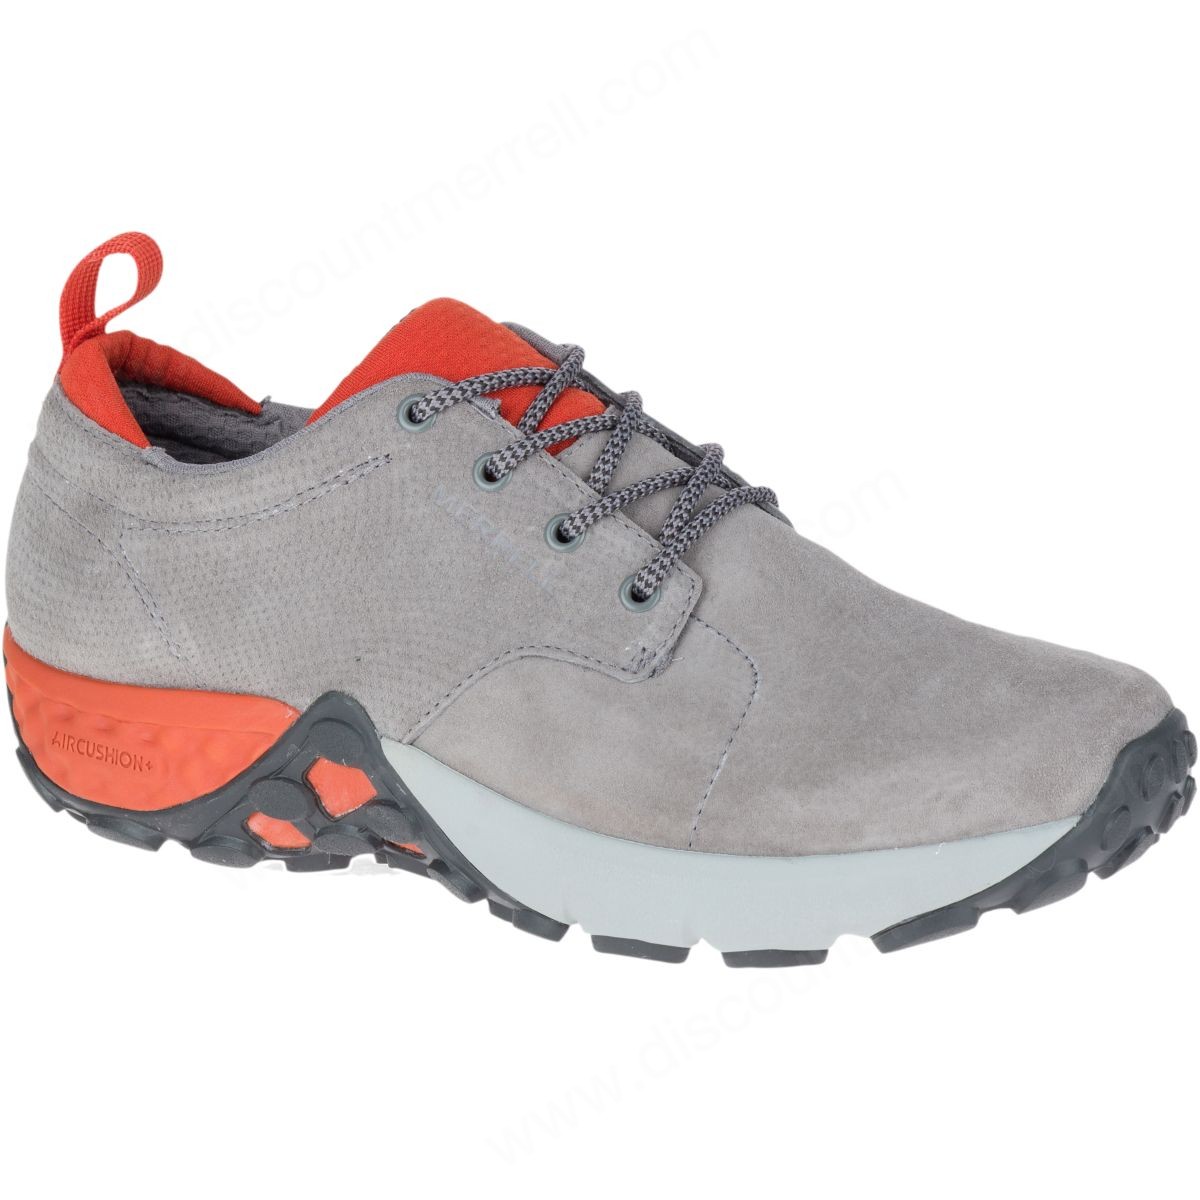 Merrell Man's Jungle Lace Ac+ Frost Grey - Merrell Man's Jungle Lace Ac+ Frost Grey